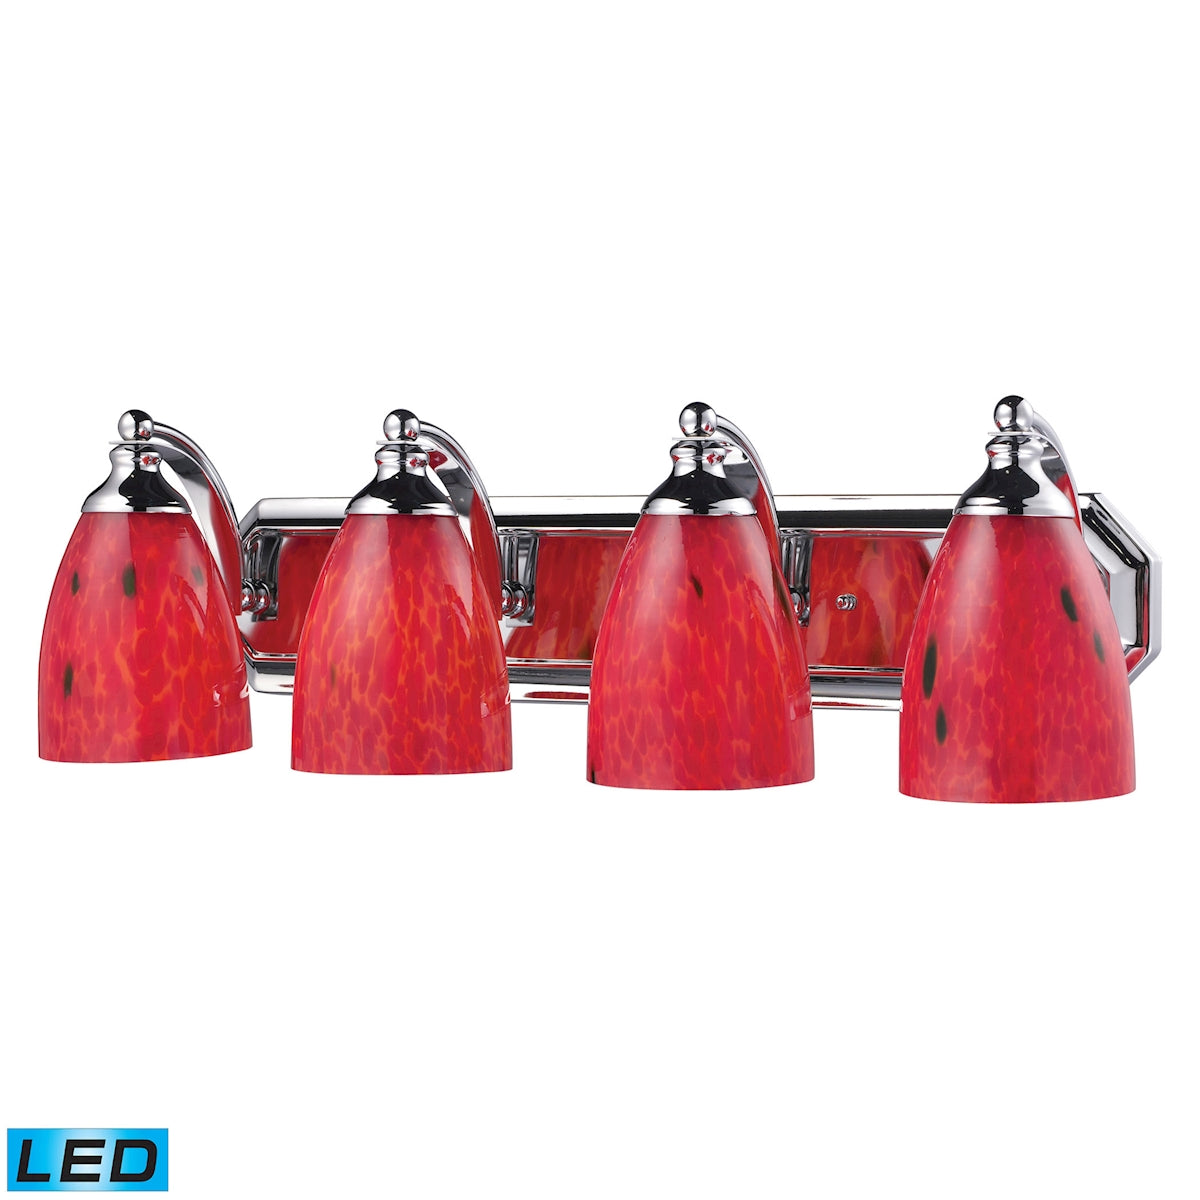 ELK Lighting 570-4C-FR-LED Mix and Match Vanity 4-Light Wall Lamp in Chrome with Fire Red Glass - Includes LED Bulbs